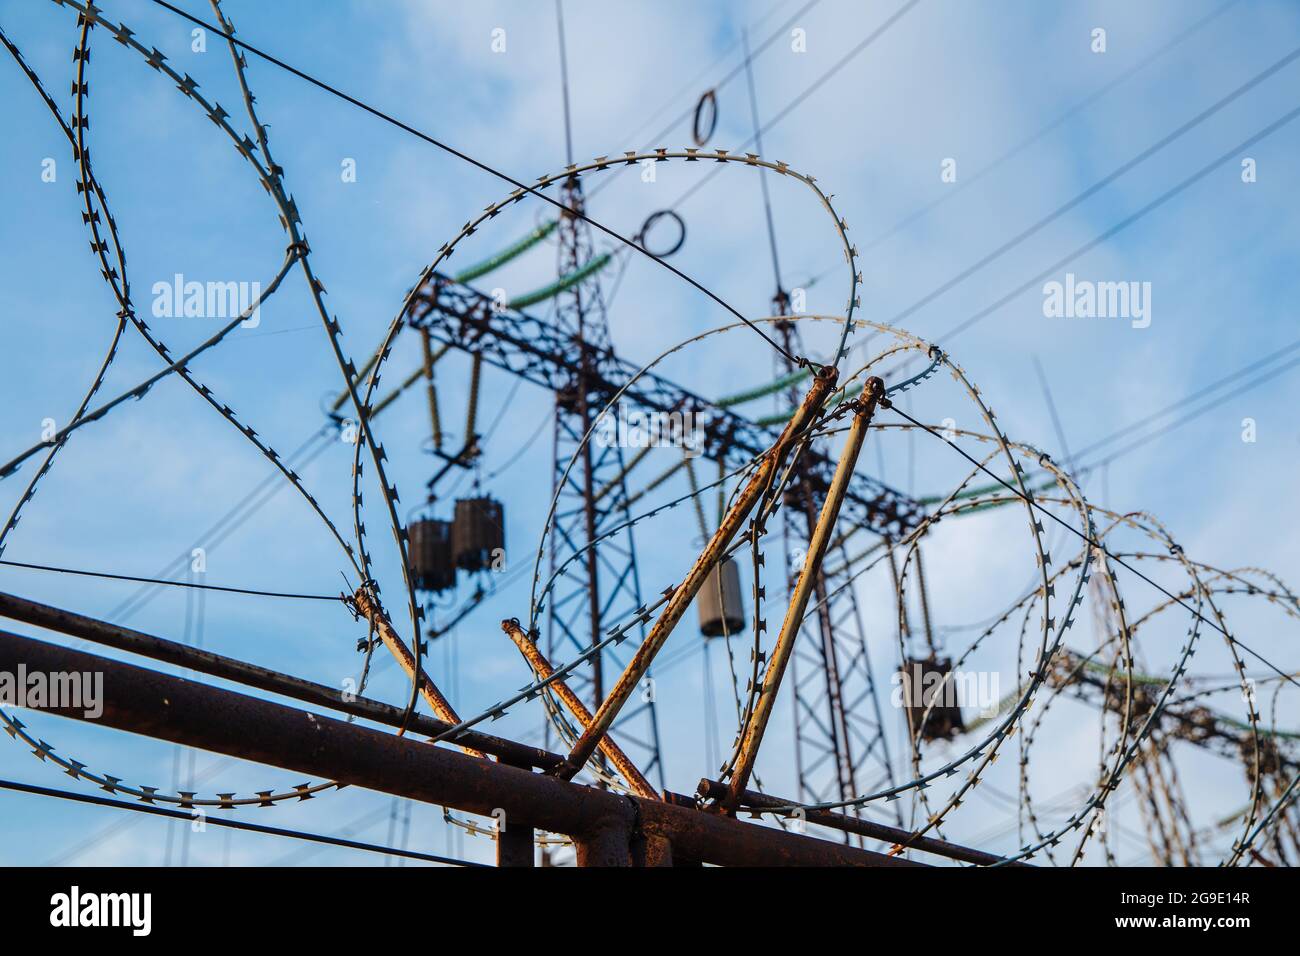 Barbed wire fence against the background of high voltage power lines. Stock Photo